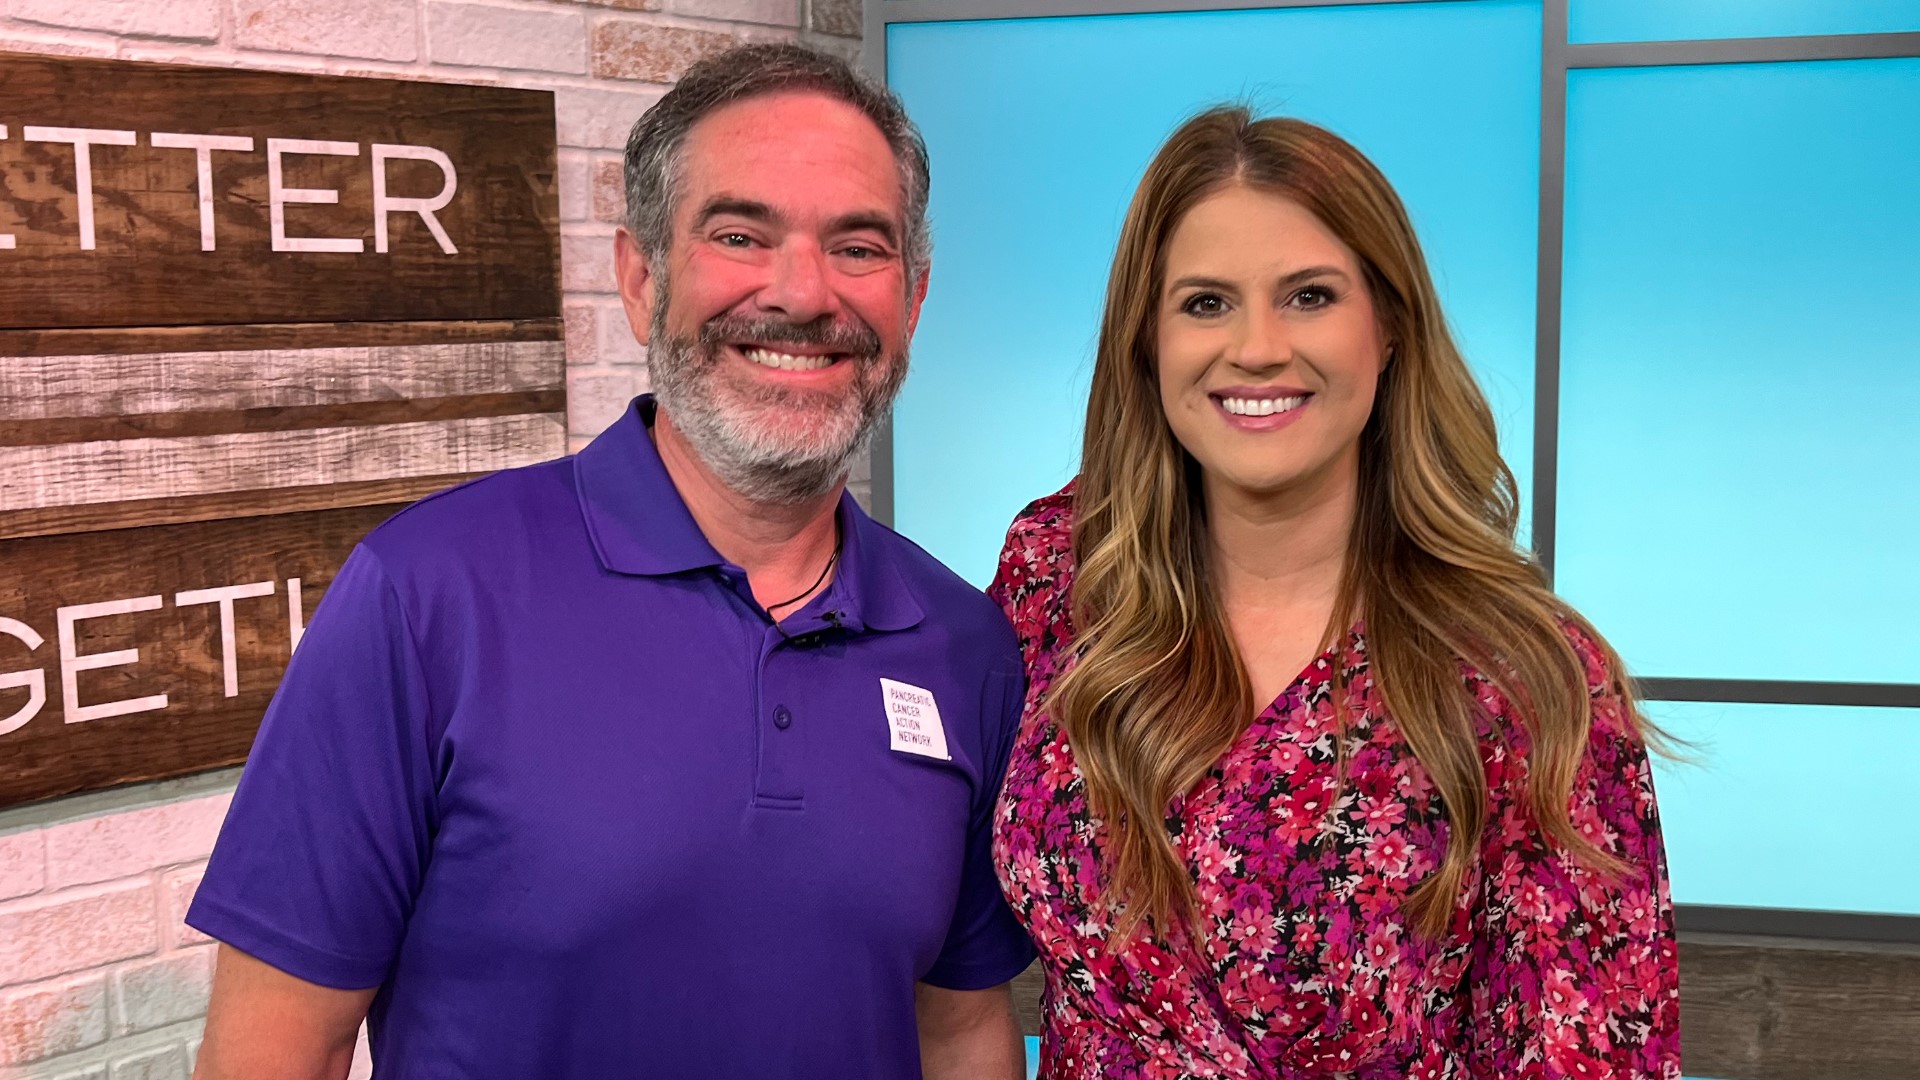 President of Moix RV shares his personal story about disease while encouraging Arkansans to participate in the Purple Stride event happening on Saturday, April 27th.